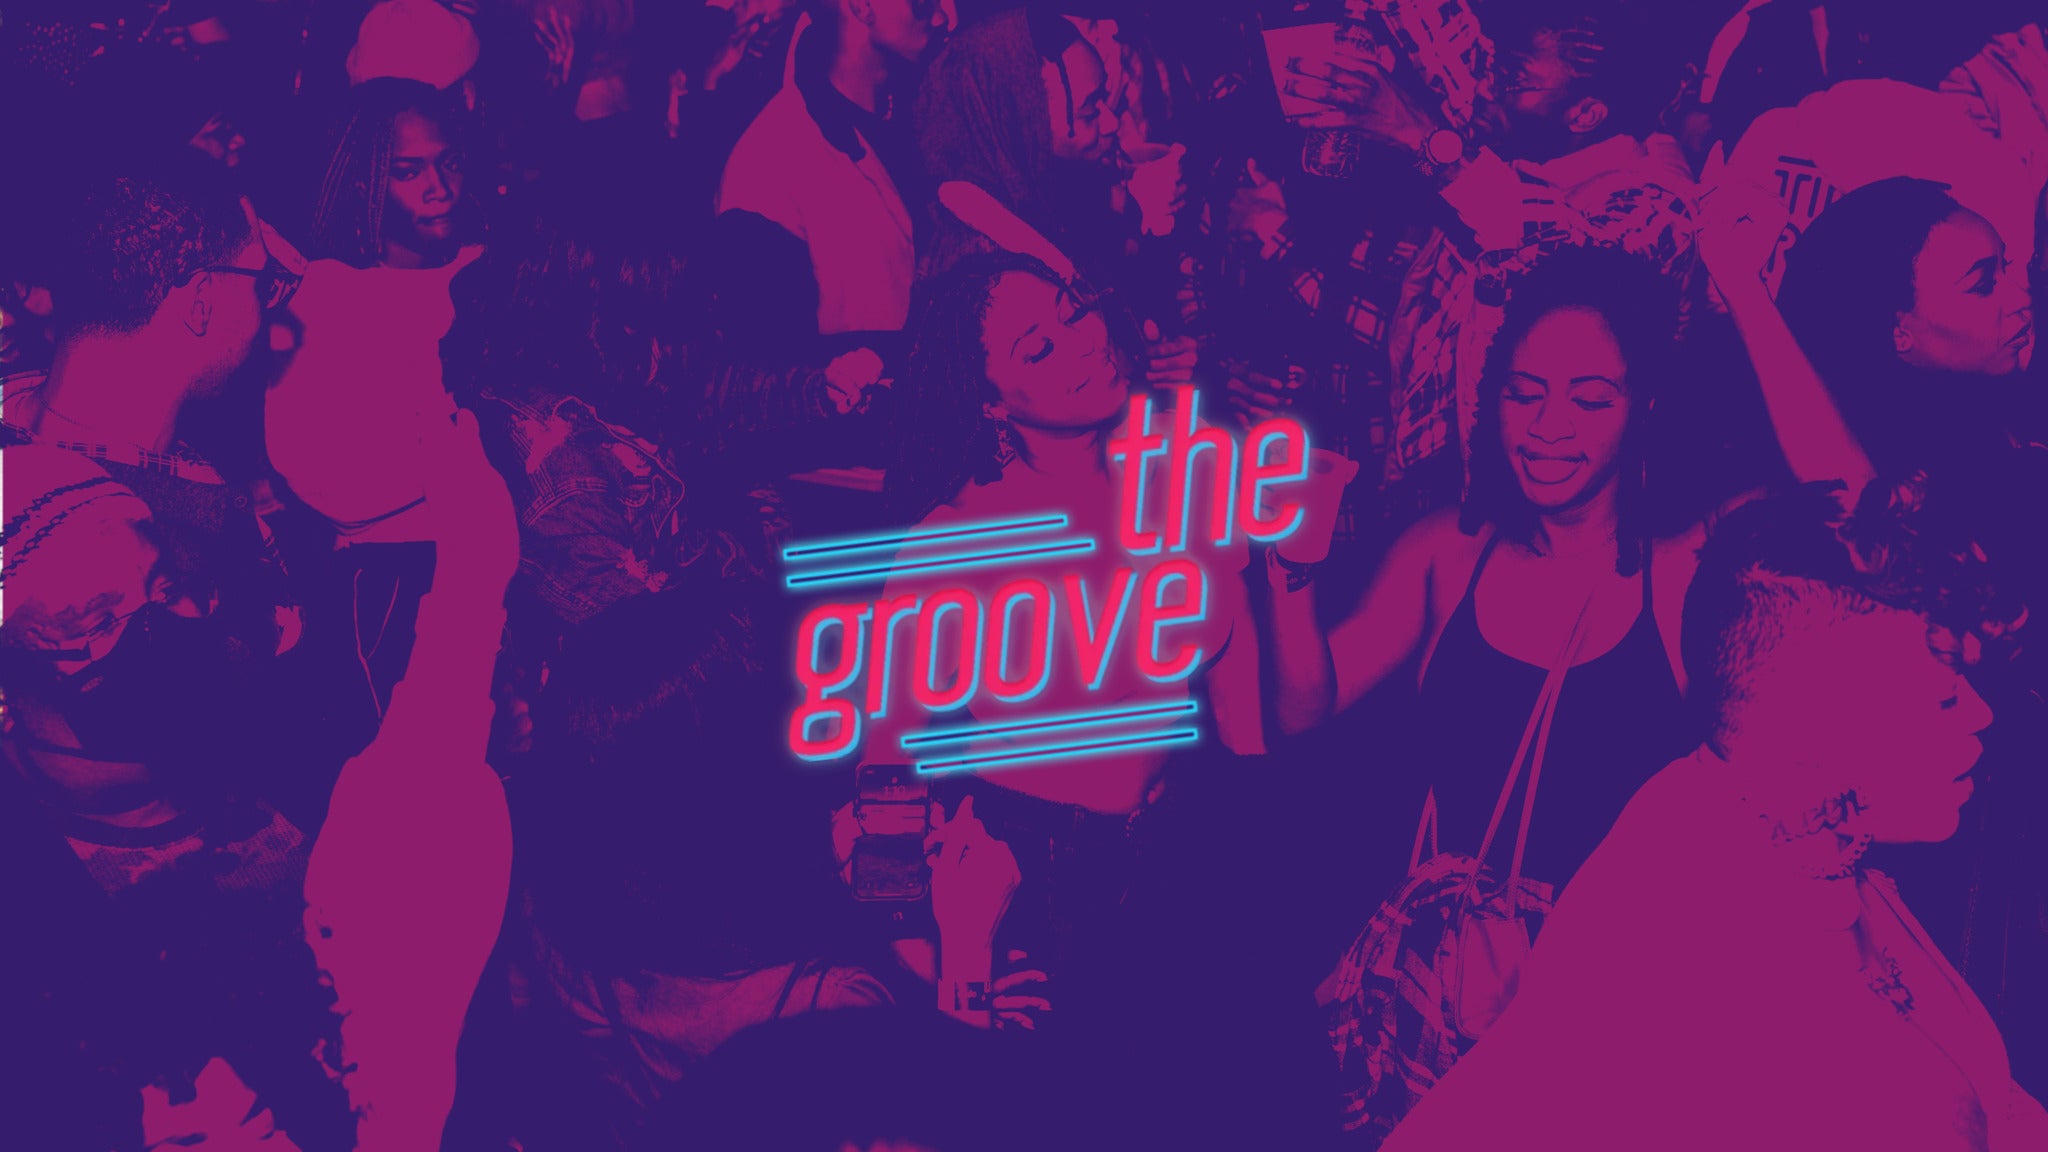 Image used with permission from Ticketmaster | The Groove: R&B All Night tickets